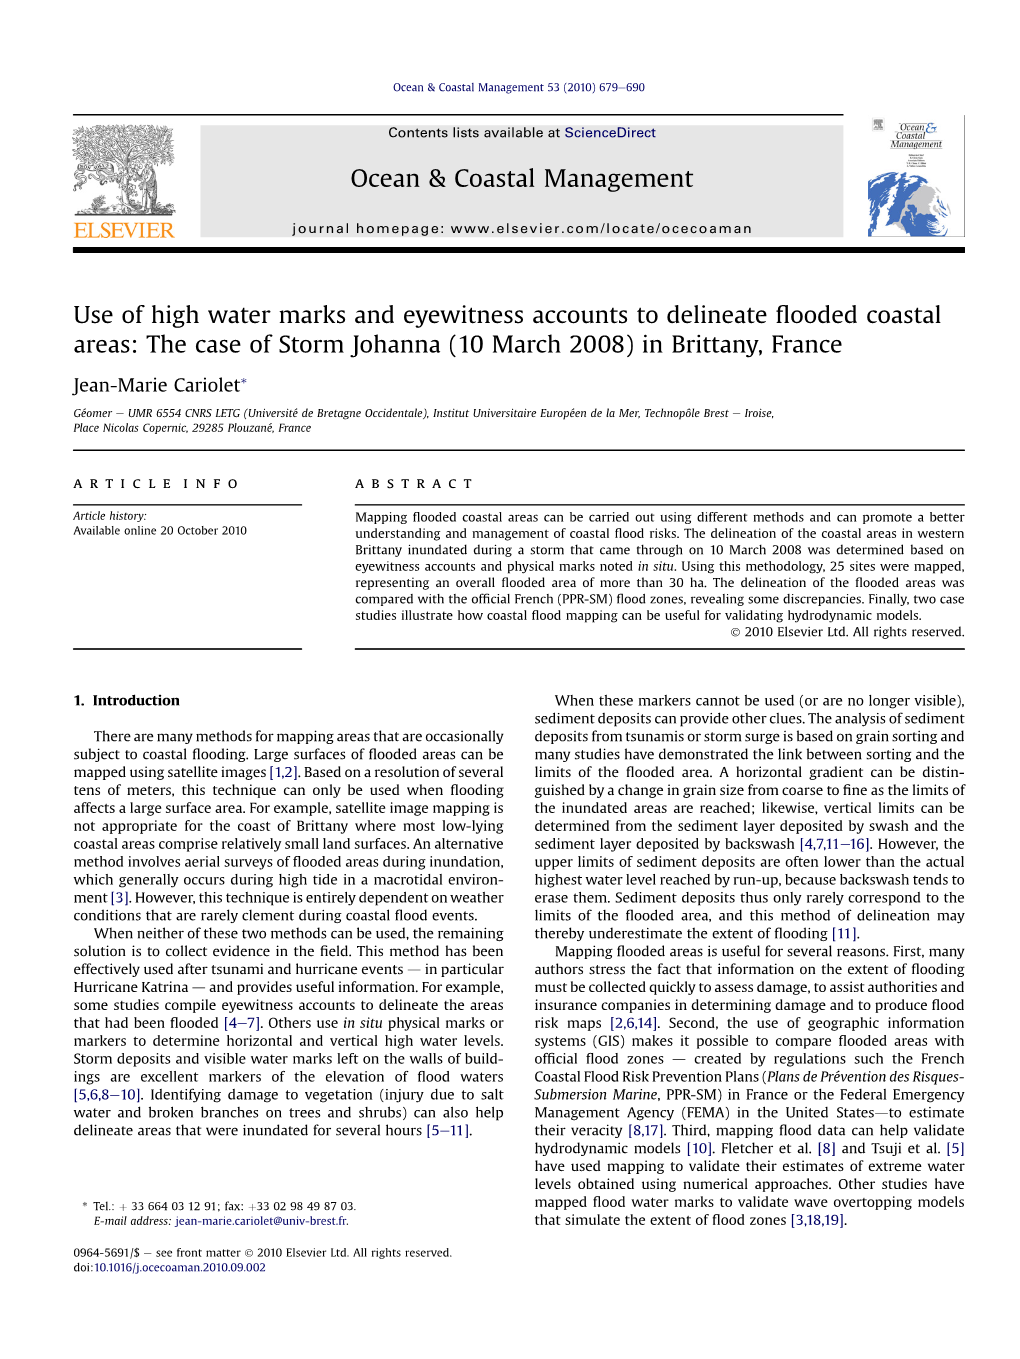 Use of High Water Marks and Eyewitness Accounts to Delineate ﬂooded Coastal Areas: the Case of Storm Johanna (10 March 2008) in Brittany, France